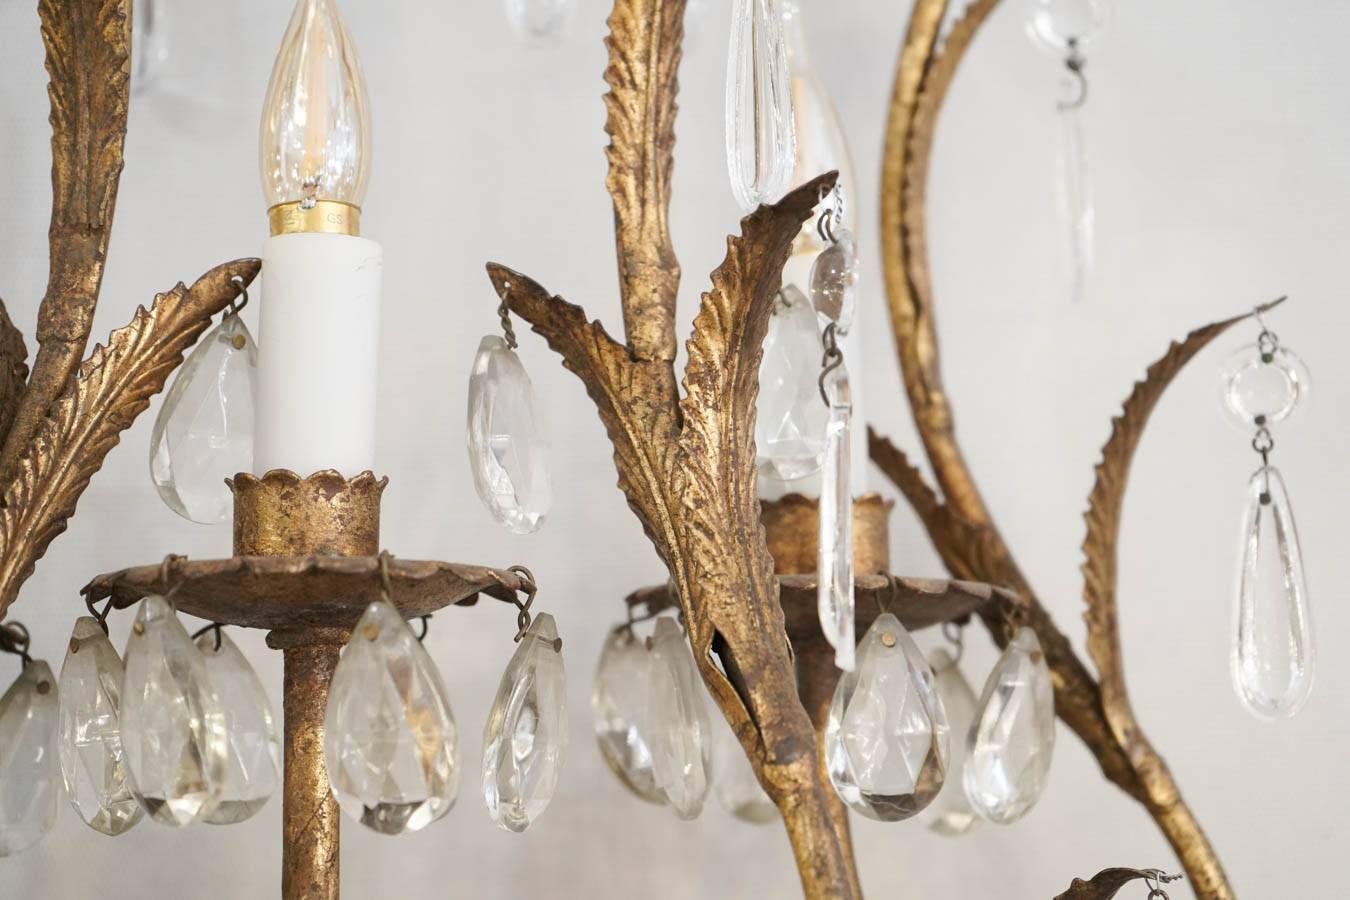 Pair of Sconces in Gold gilt metal with crystals, 1950-1960, Three lights 1